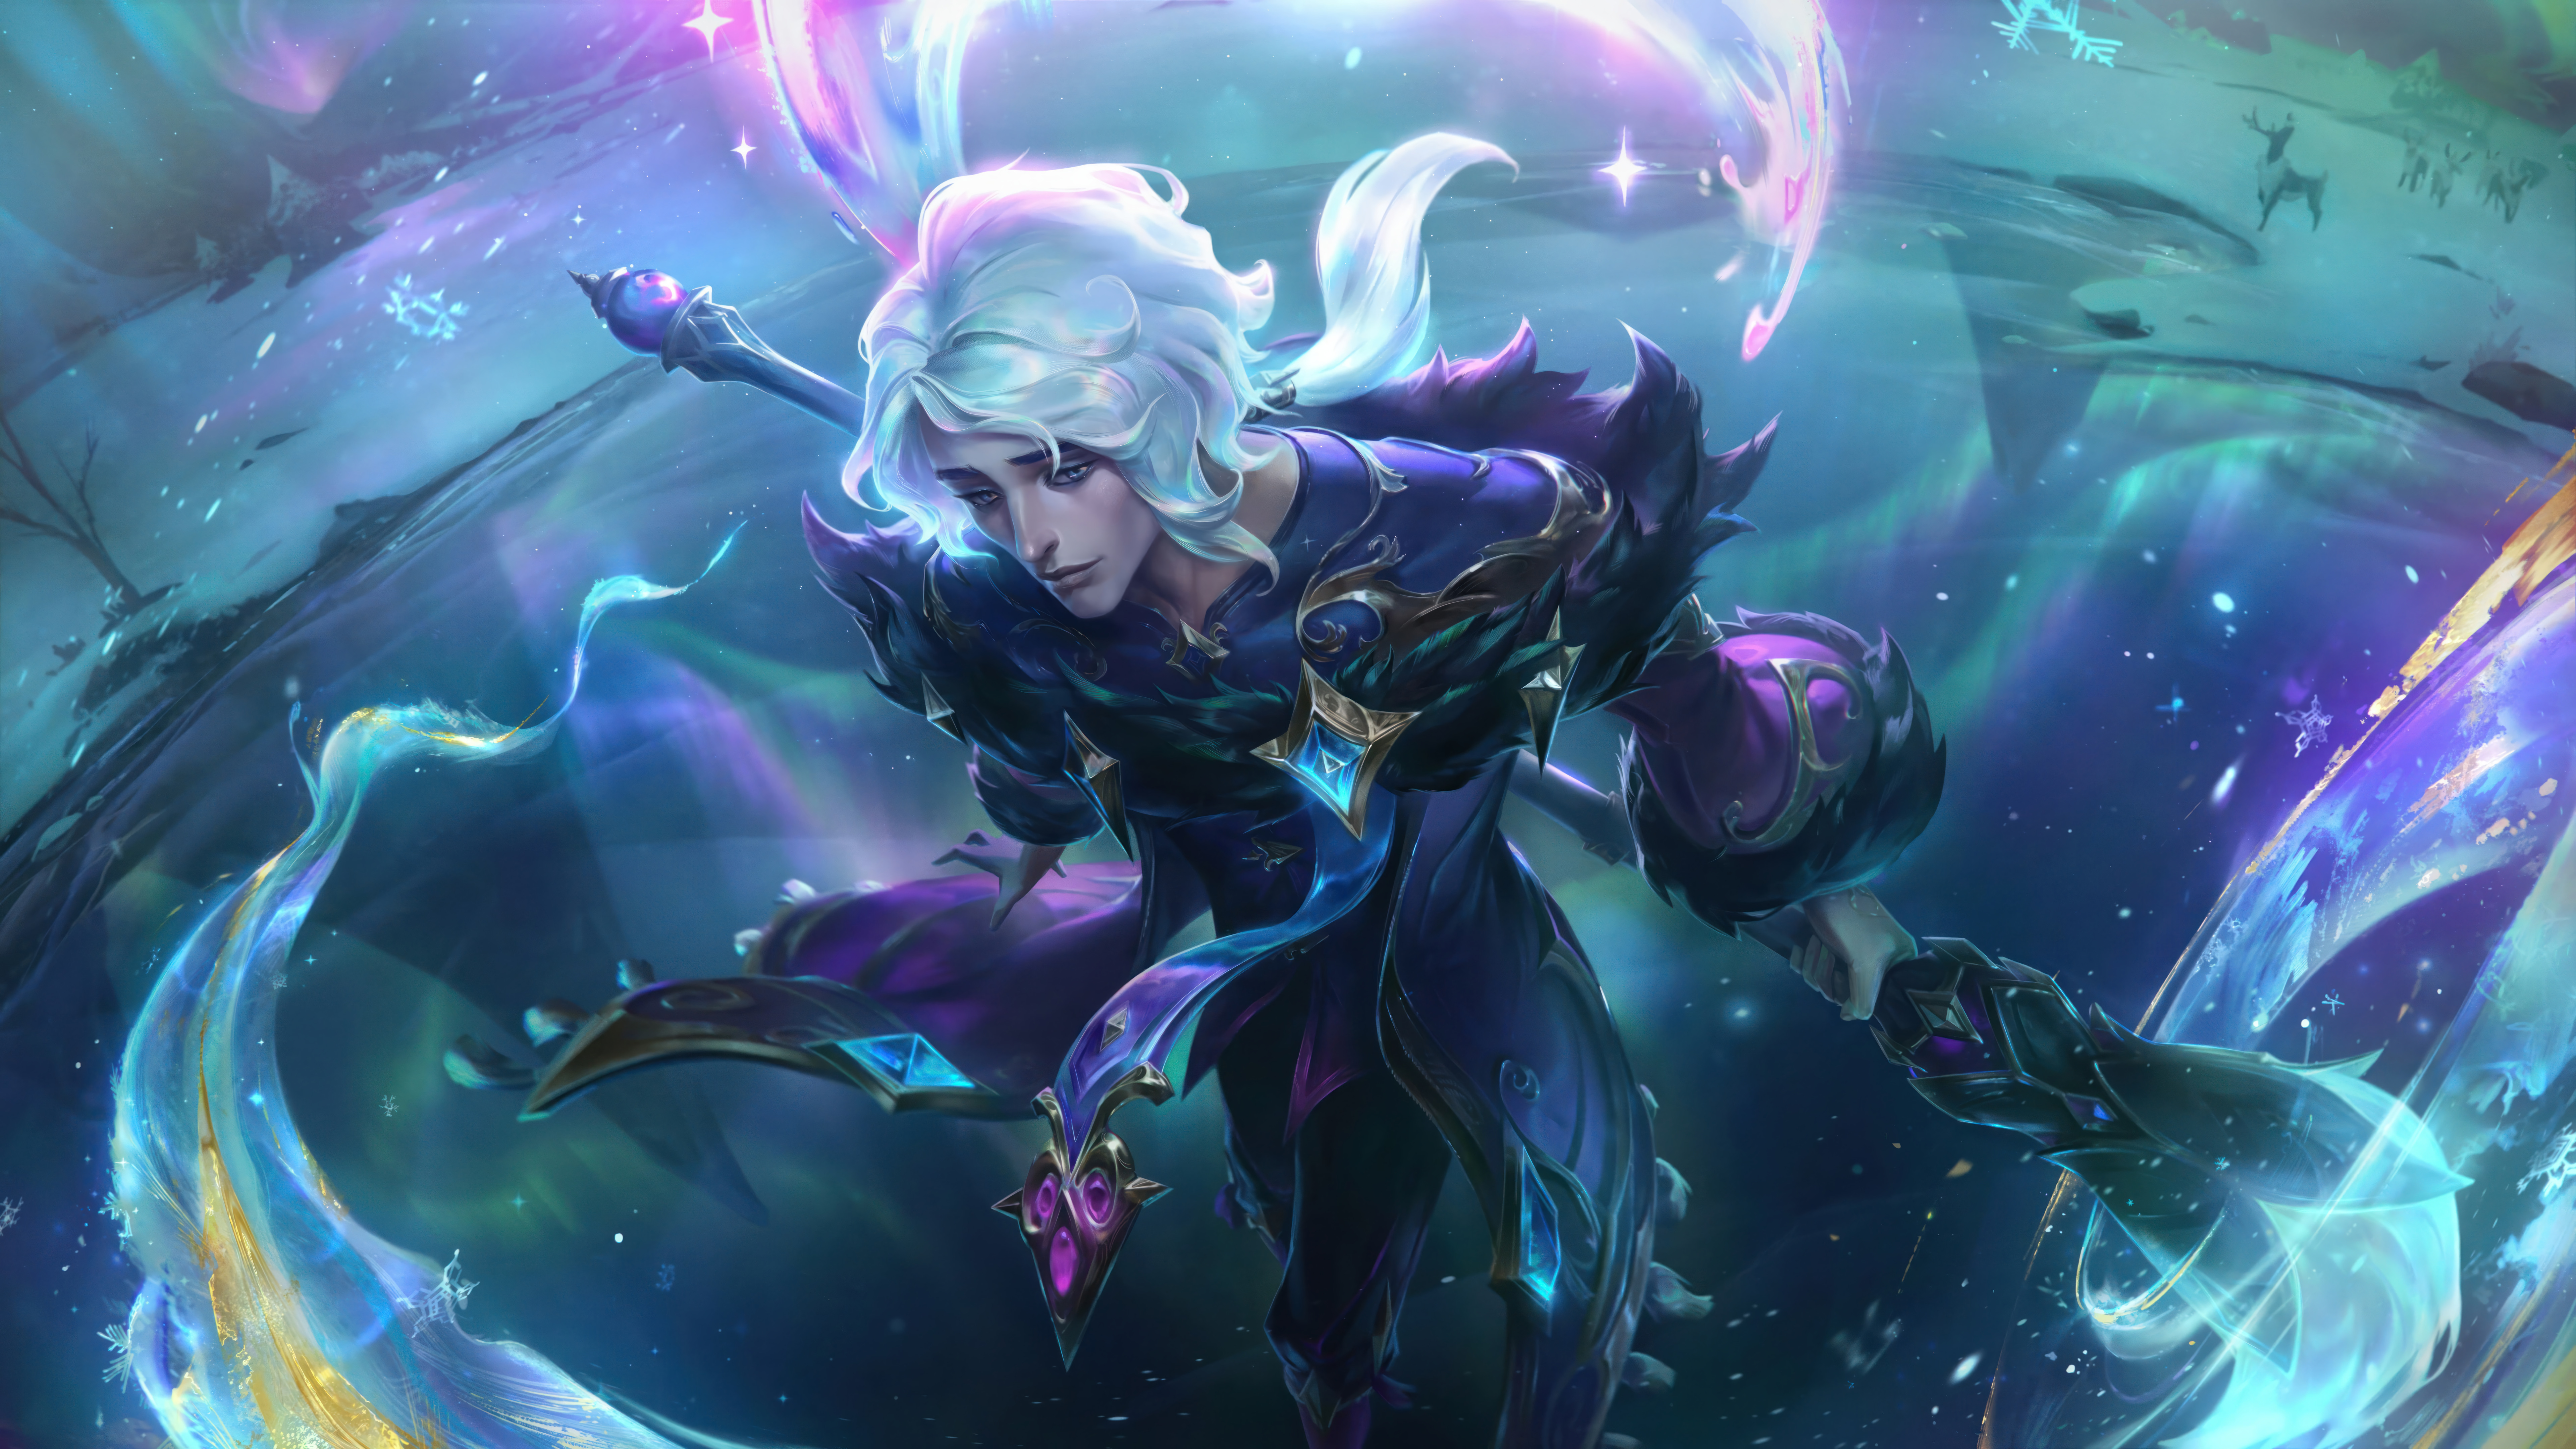 General 7680x4320 Winterblessed (League of Legends) Hwei (League of Legends) League of Legends digital art Riot Games GZG video games video game characters 4K video game art water video game boys snow aurorae paint brushes